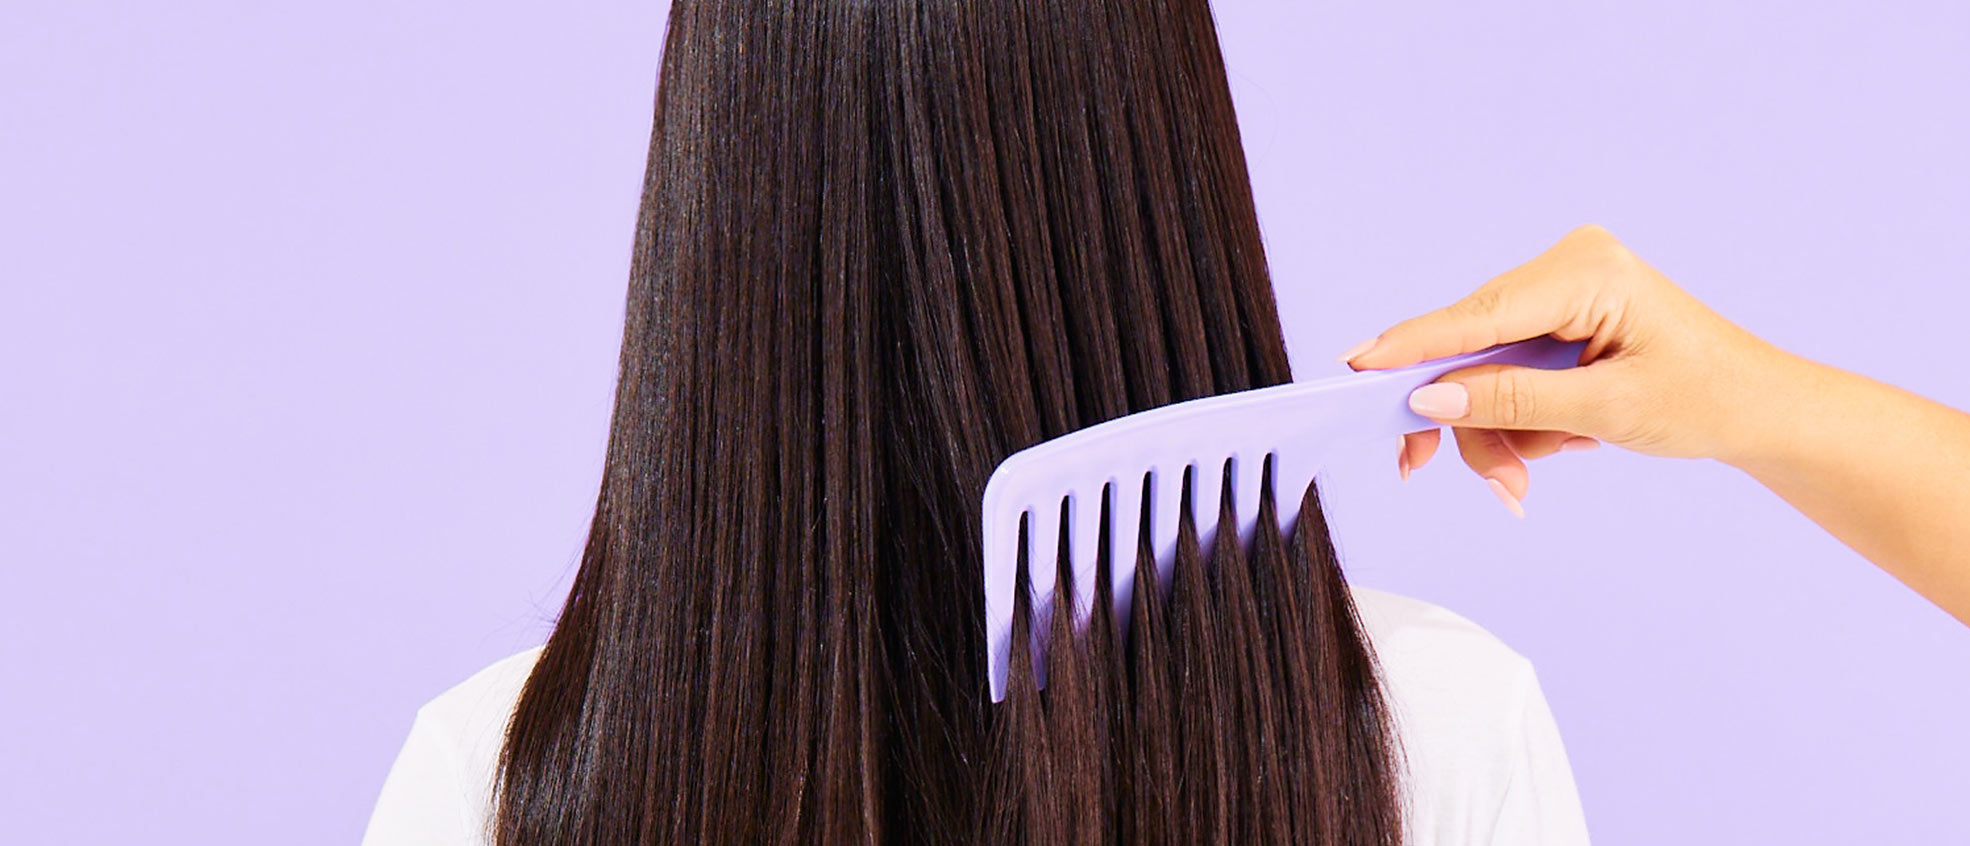 Image shows a woman's back head with brunette hair being combed vertically by another woman's hand. Subject poses in front of a lavender color 
      background.